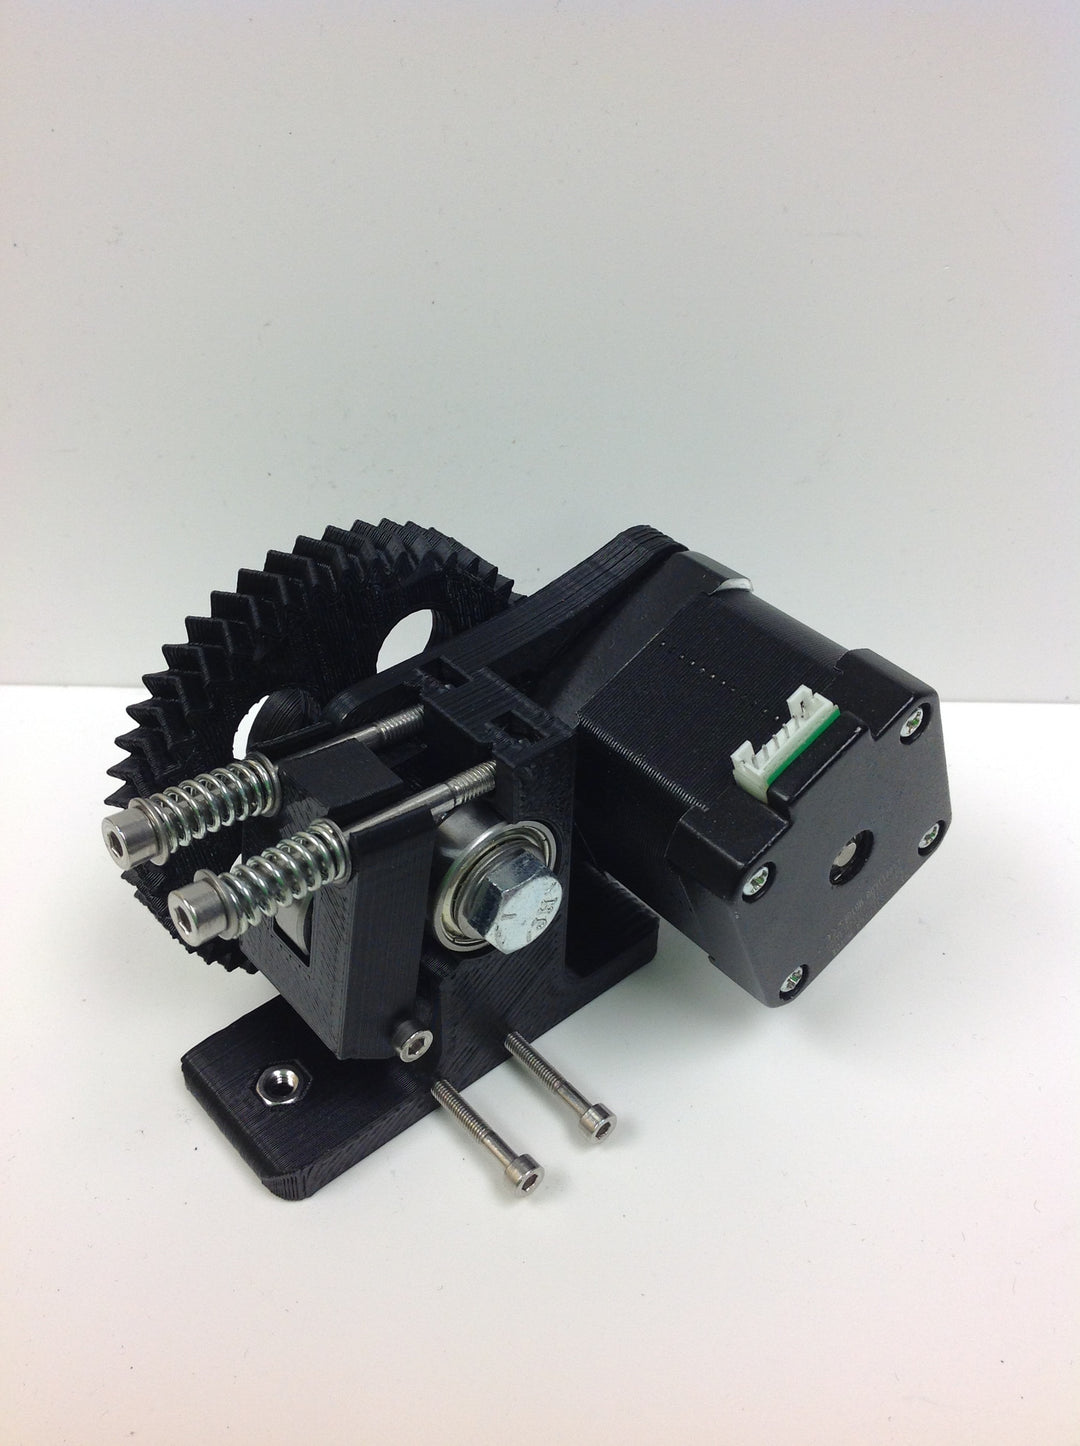 Fully assembled Greg's Wade's Type extruder (Discountinued)